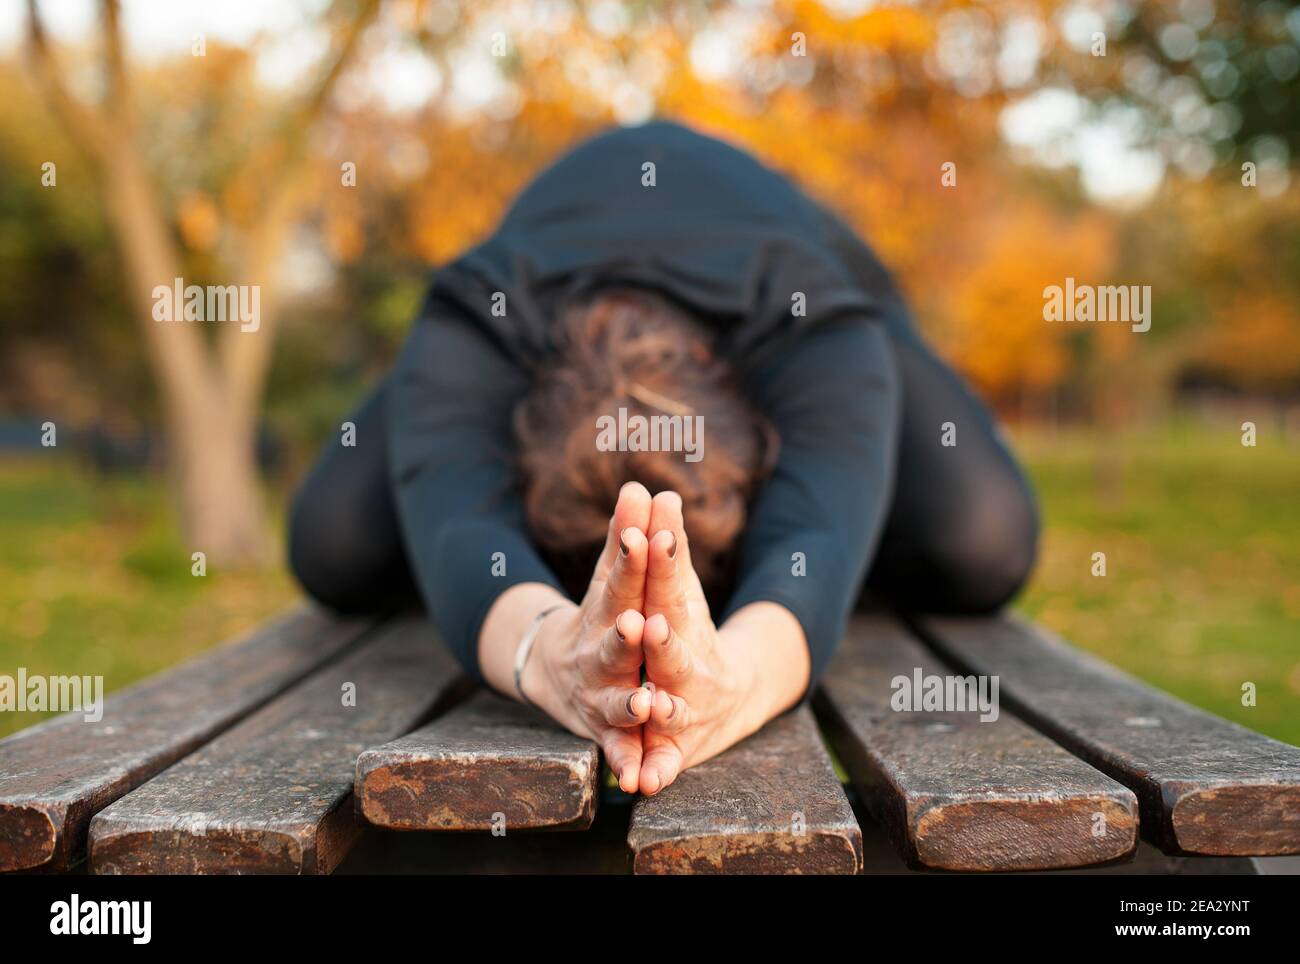 Woman doing yoga stretching outdoor with hands clasped. Focus on hands touching in child pose, Balasana. Workout in nature, healthy lifestyle concept Stock Photo